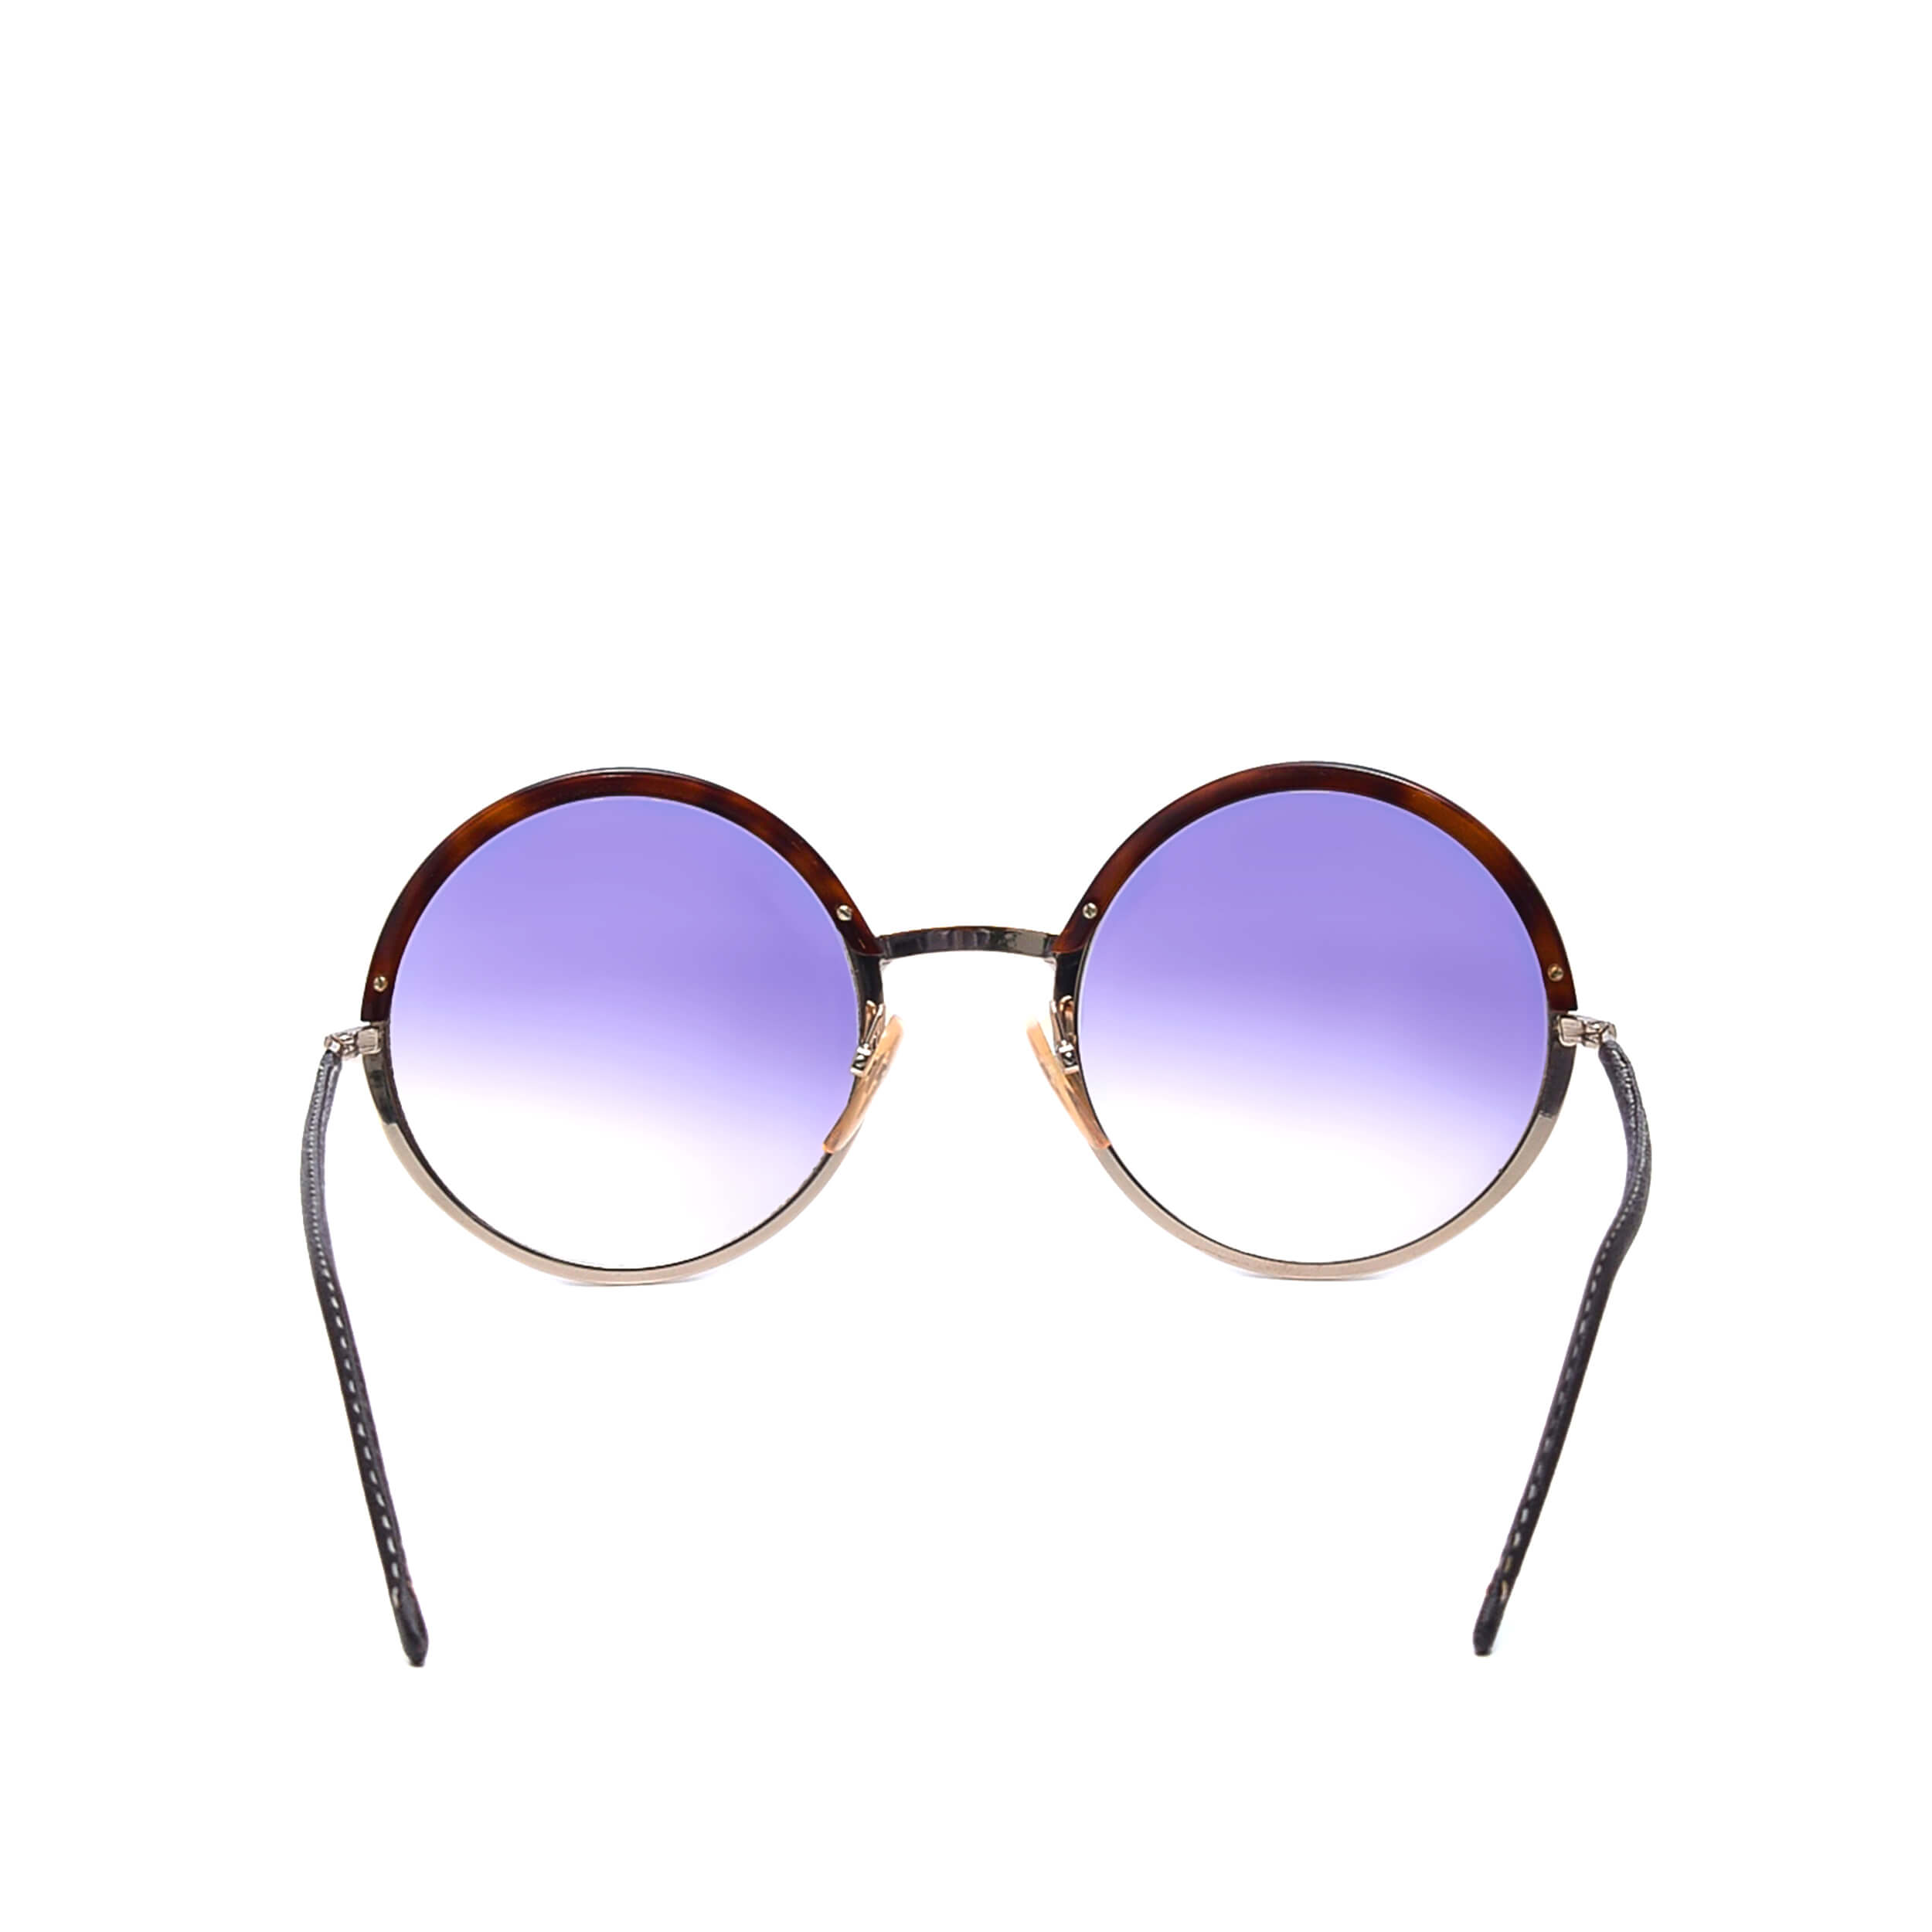 Cutler And Gross - Light Gold Tone Shiny Round Sunglasses